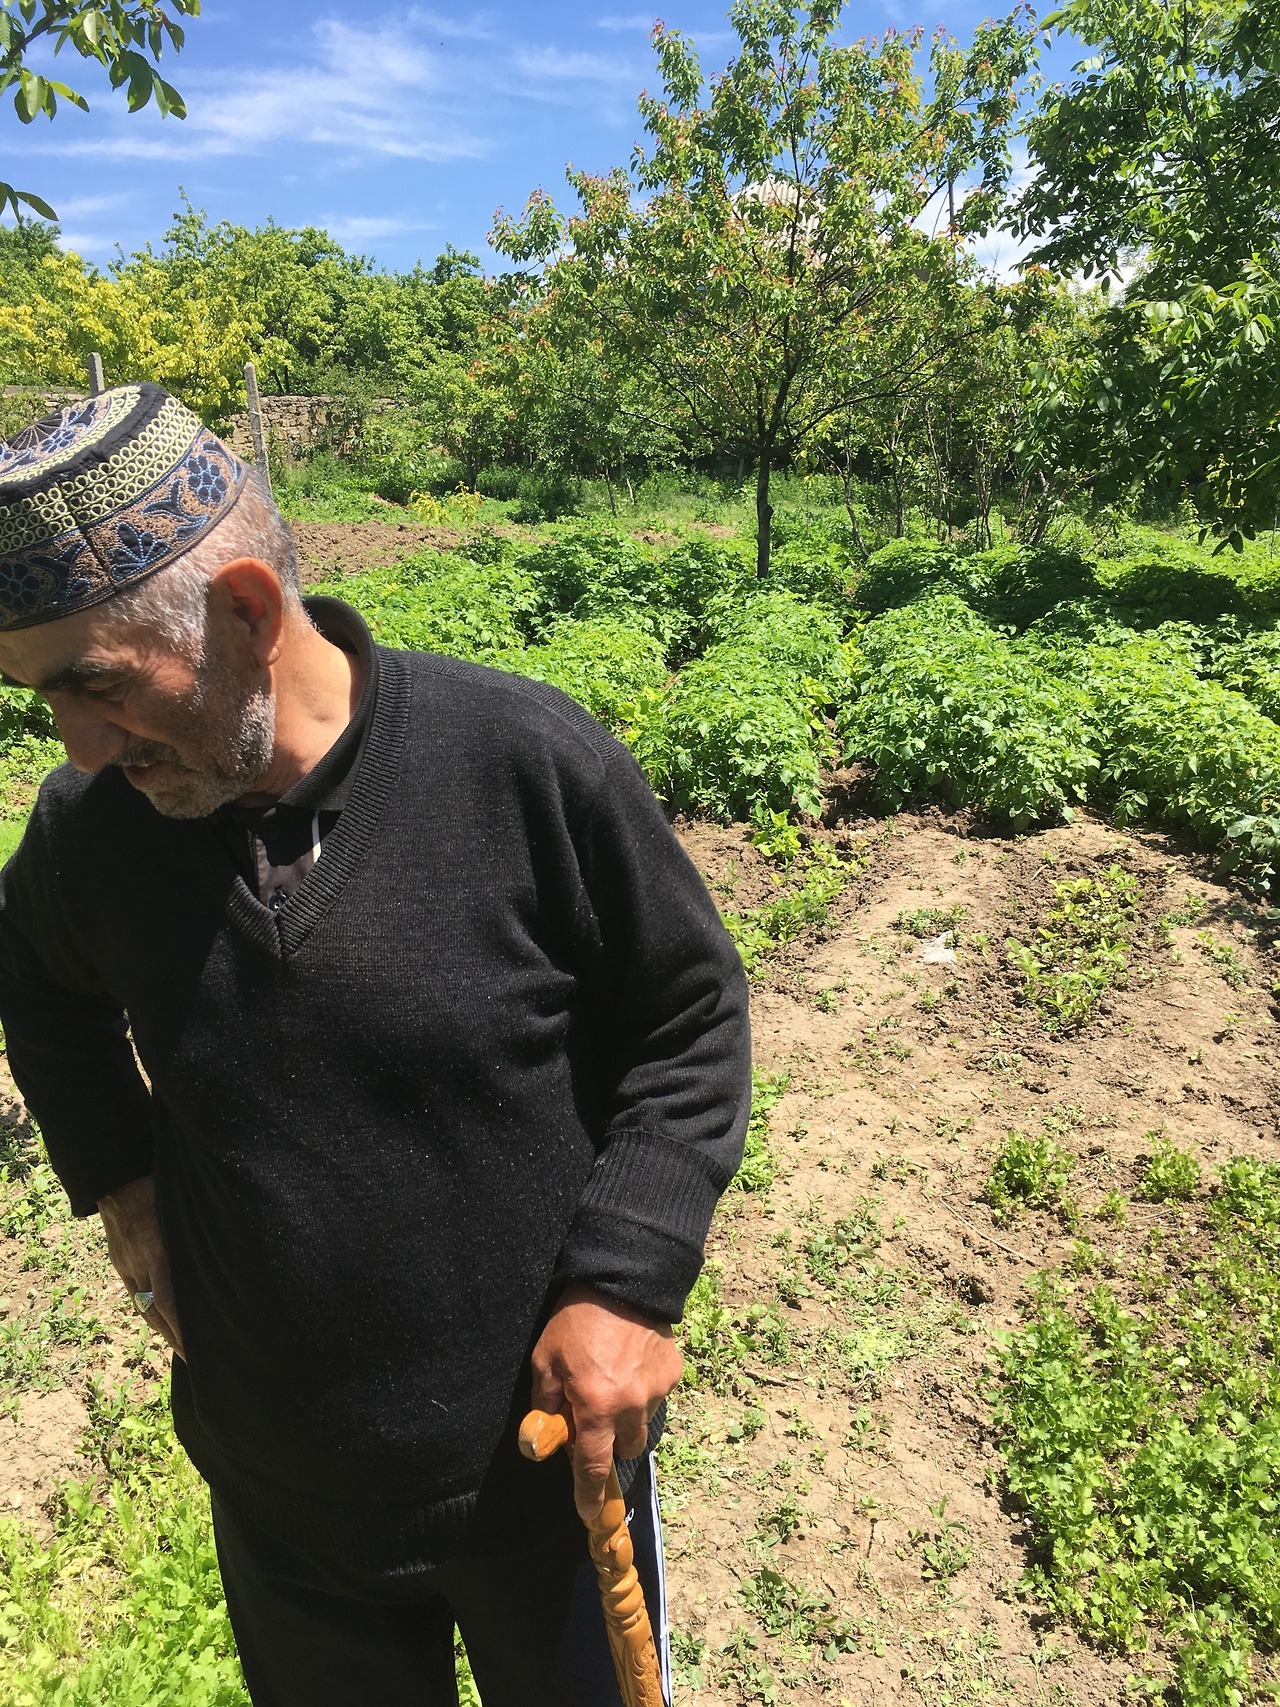 This is Hegiget in his garden. His name means “truth,” and he shared his mint with us.